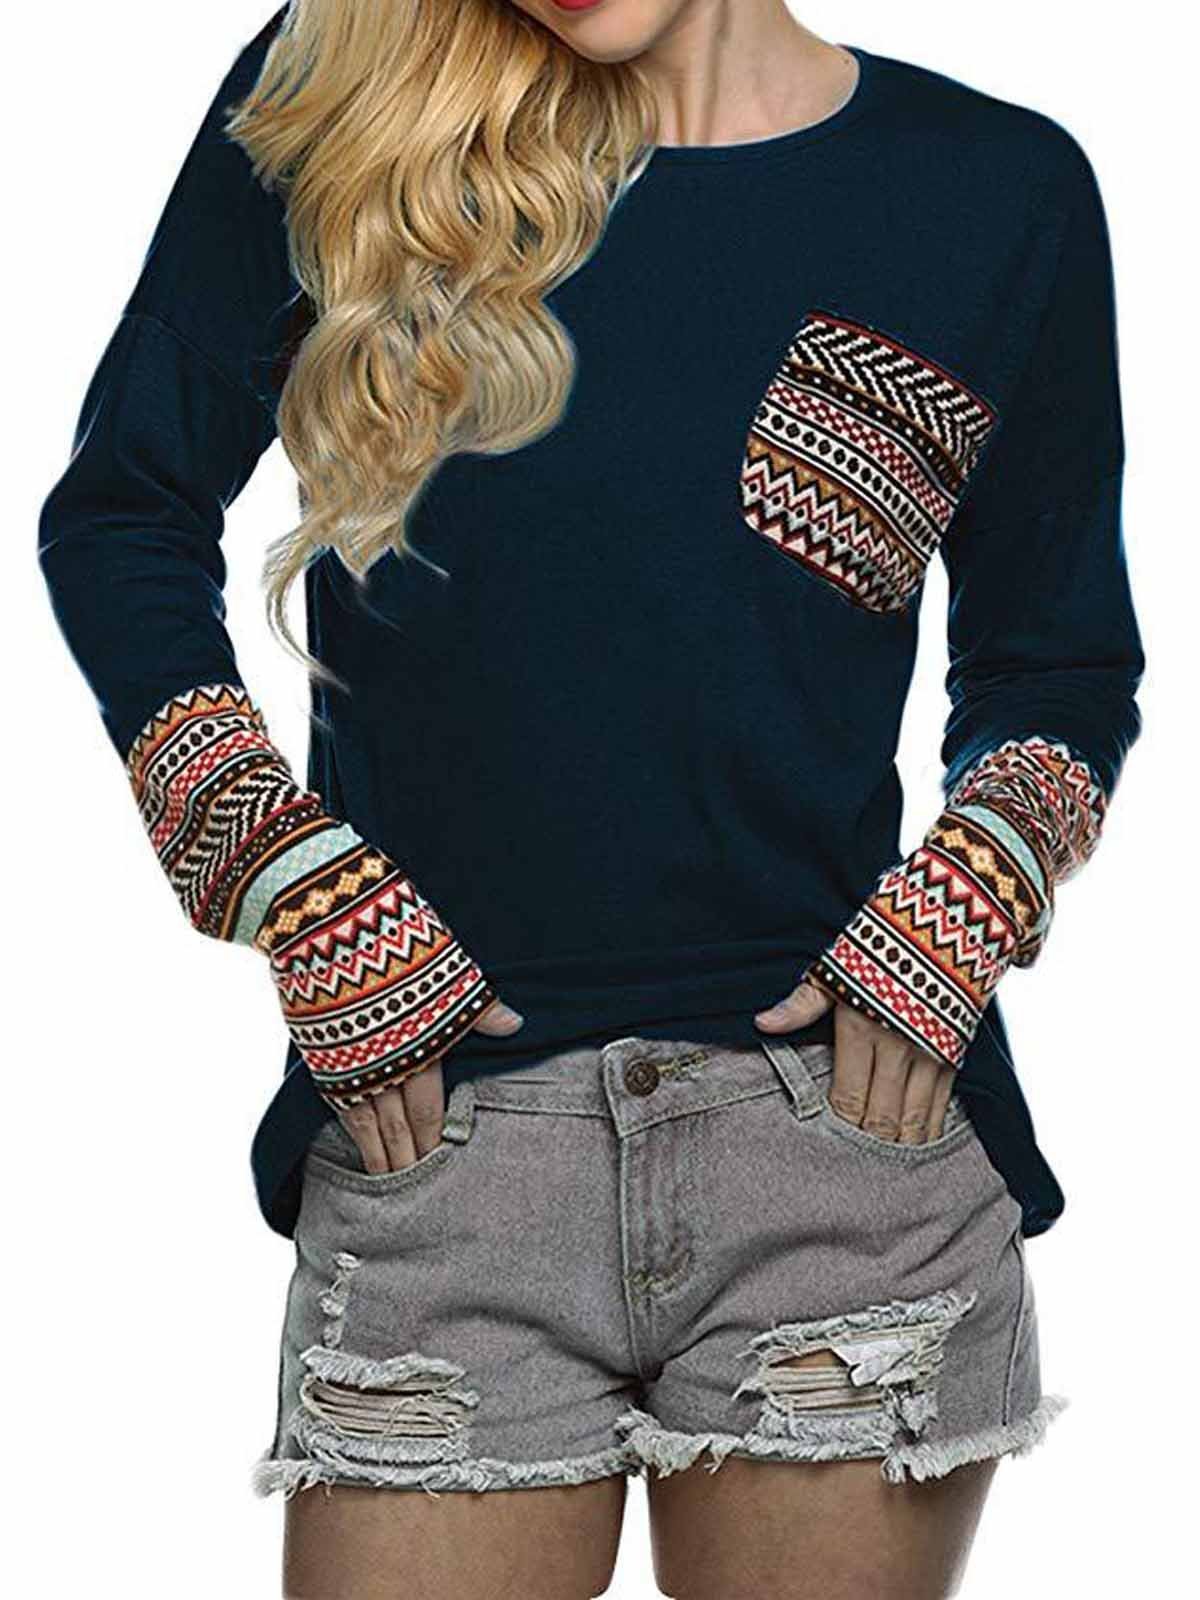 Women's Long Sleeve O-Neck Patchwork Casual Tops